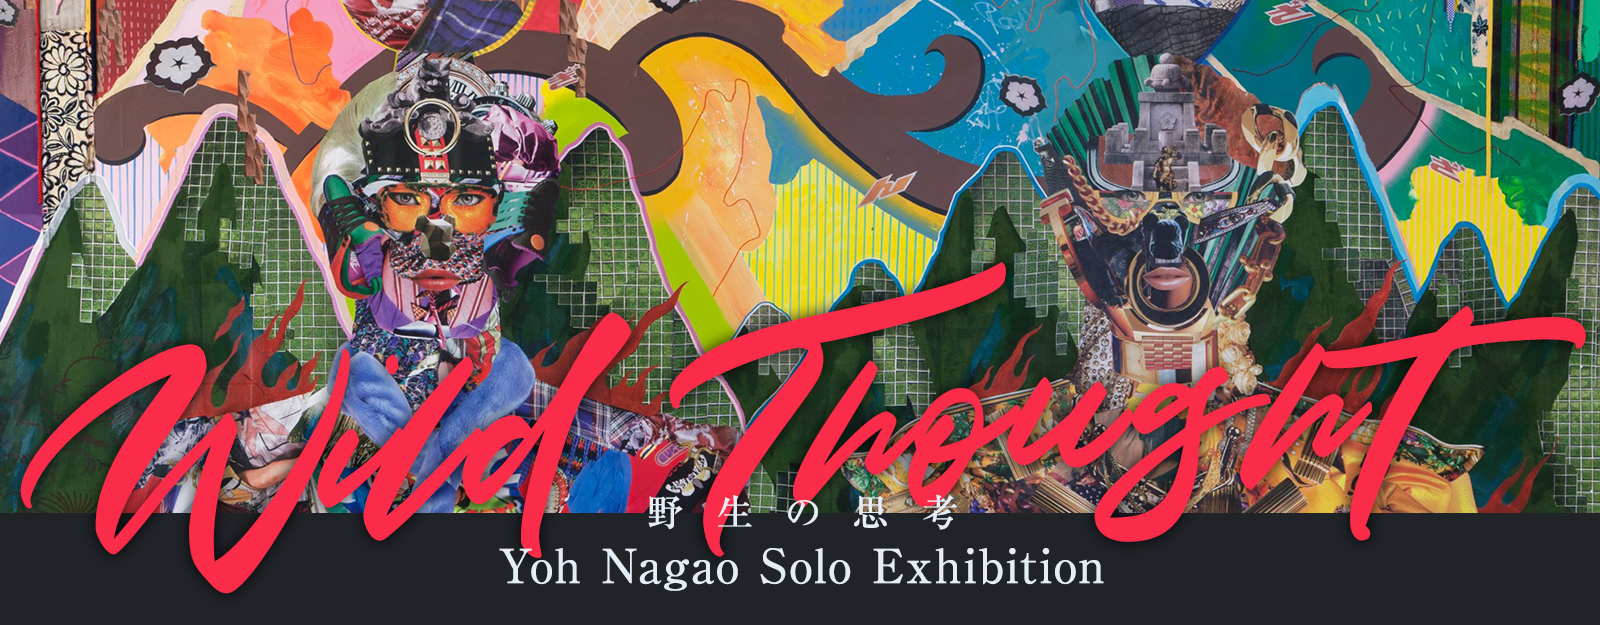 Yoh Nagao solo exhibition “Wild Thought”